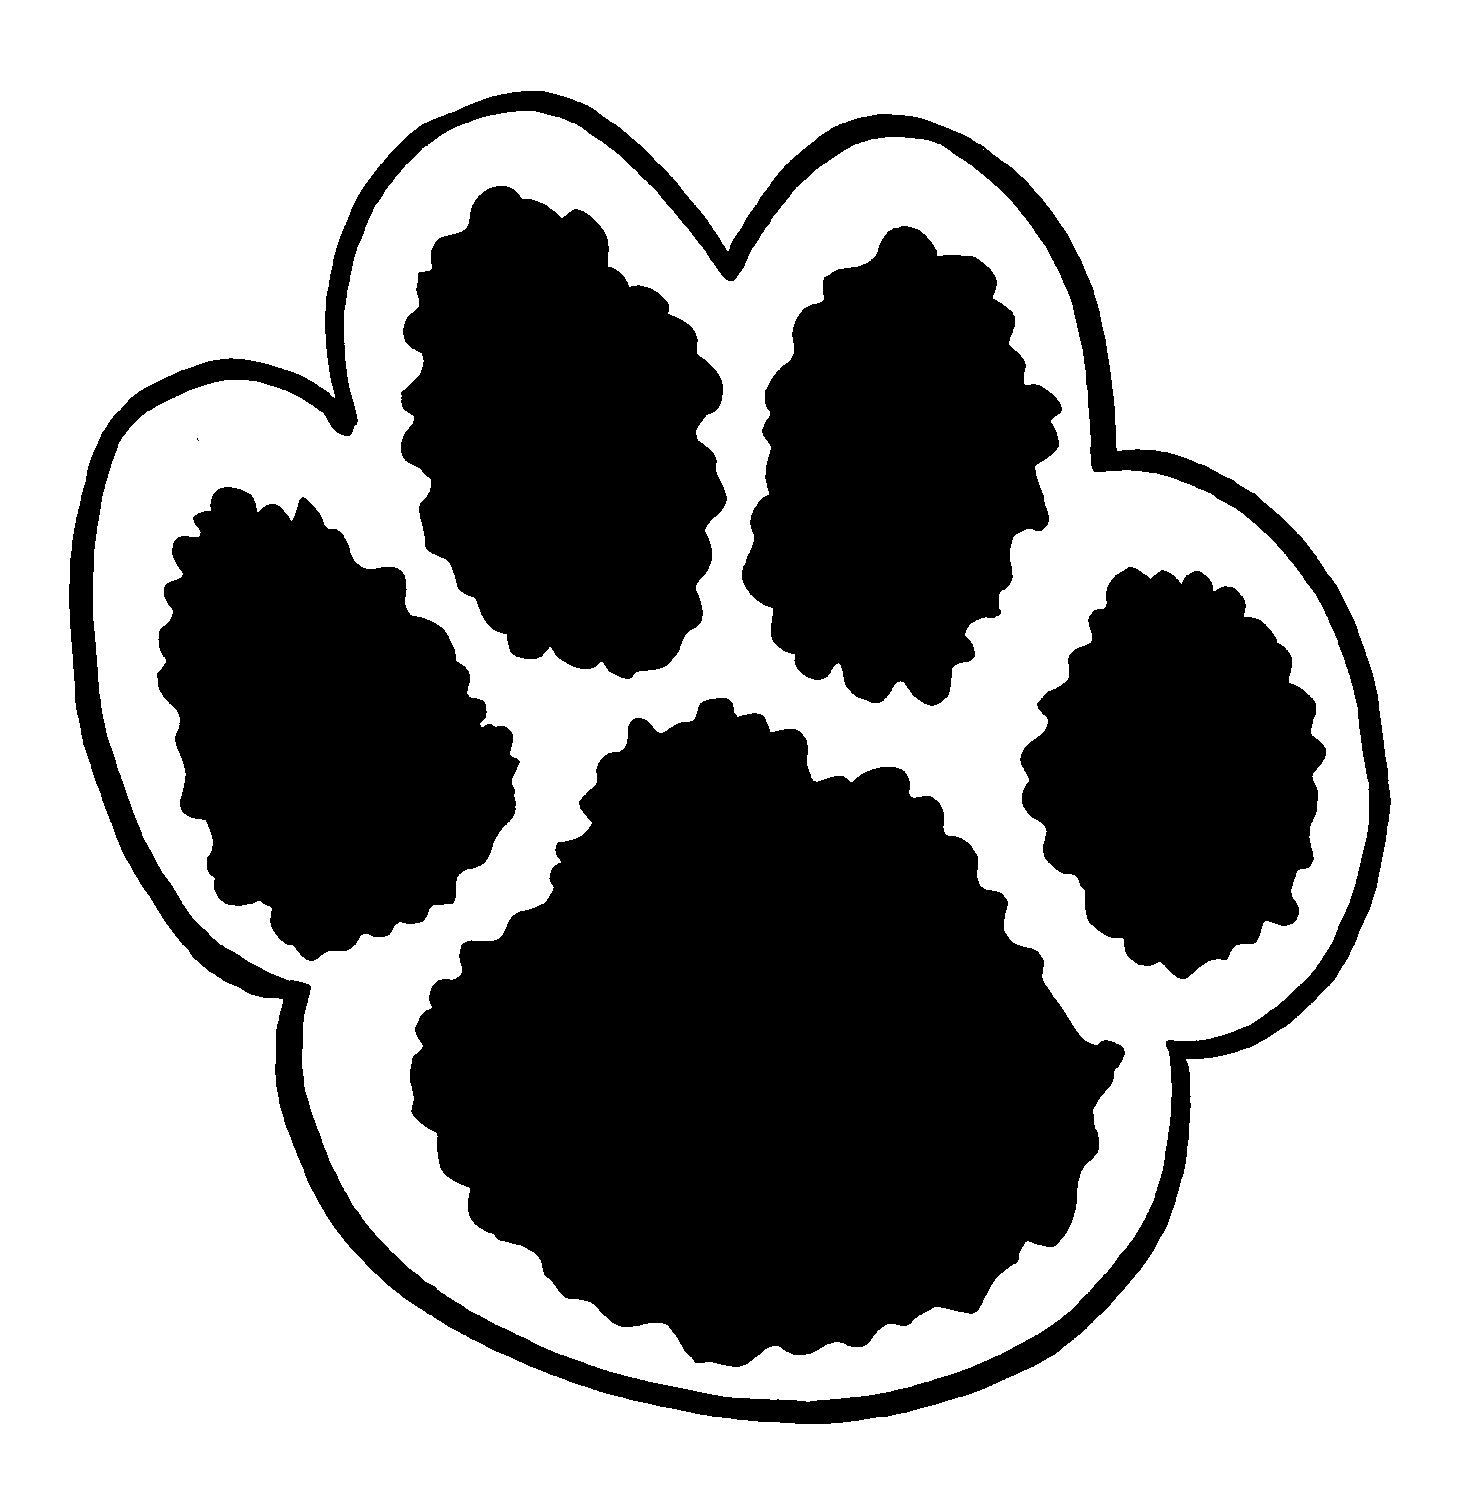 Bear Claw Drawing - ClipArt Best